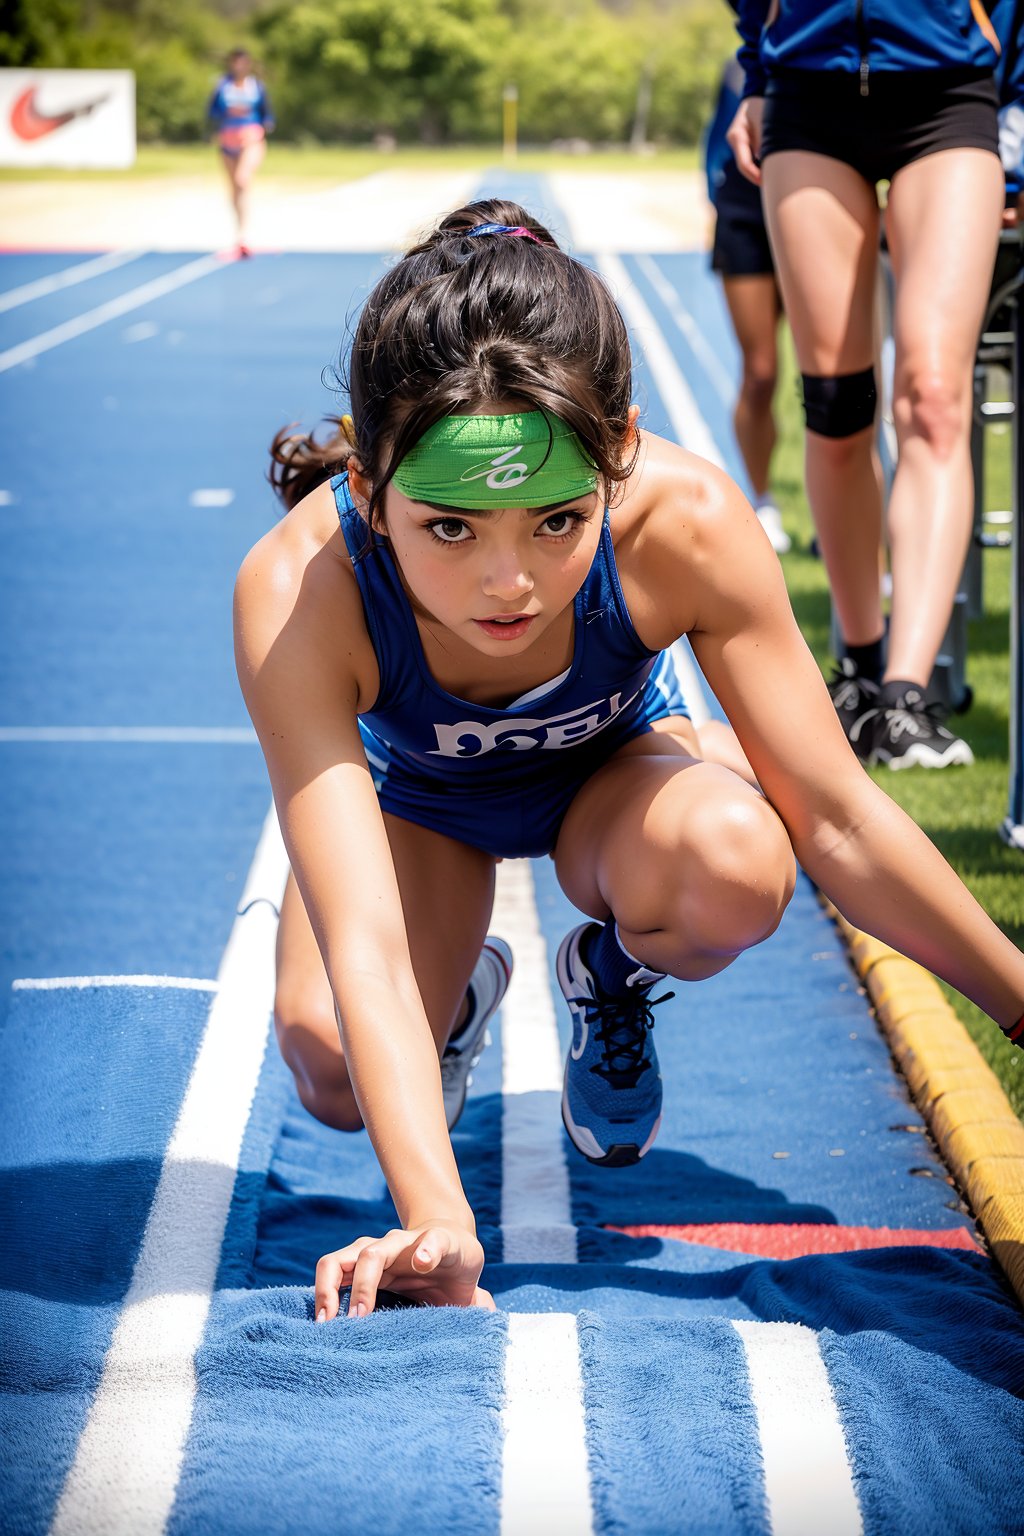 Best Quality, 32k, photorealistic, ultra-detailed, finely detailed, high resolution, perfect dynamic composition, beautiful detailed eyes, sharp,Junior high school student, track and field athlete, crouching start, 100m sprint, the moment she kicks off the starting block and starts running